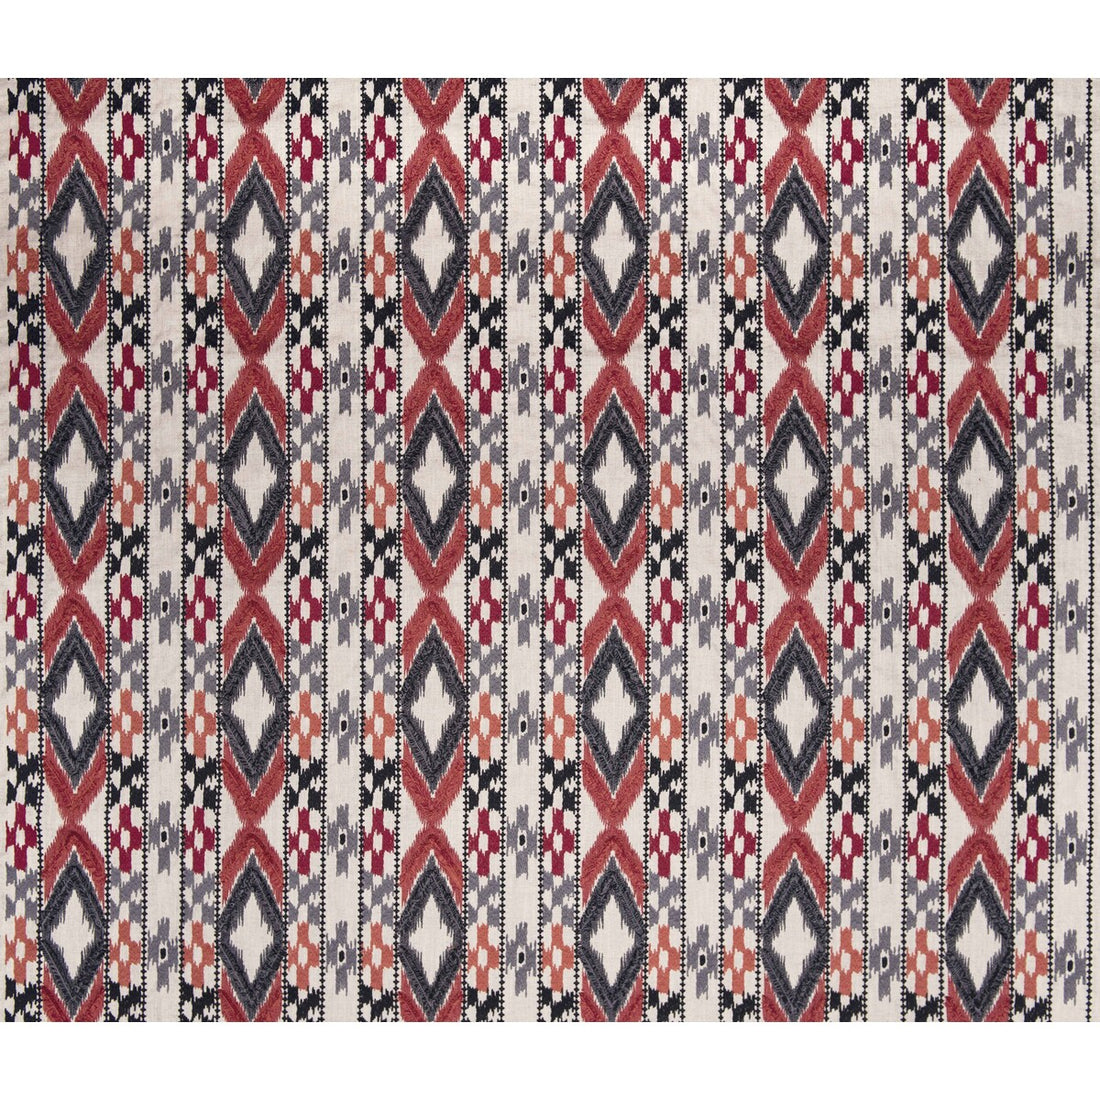 Queen fabric in rojo/gris color - pattern GDT5403.2.0 - by Gaston y Daniela in the Gaston Africalia collection